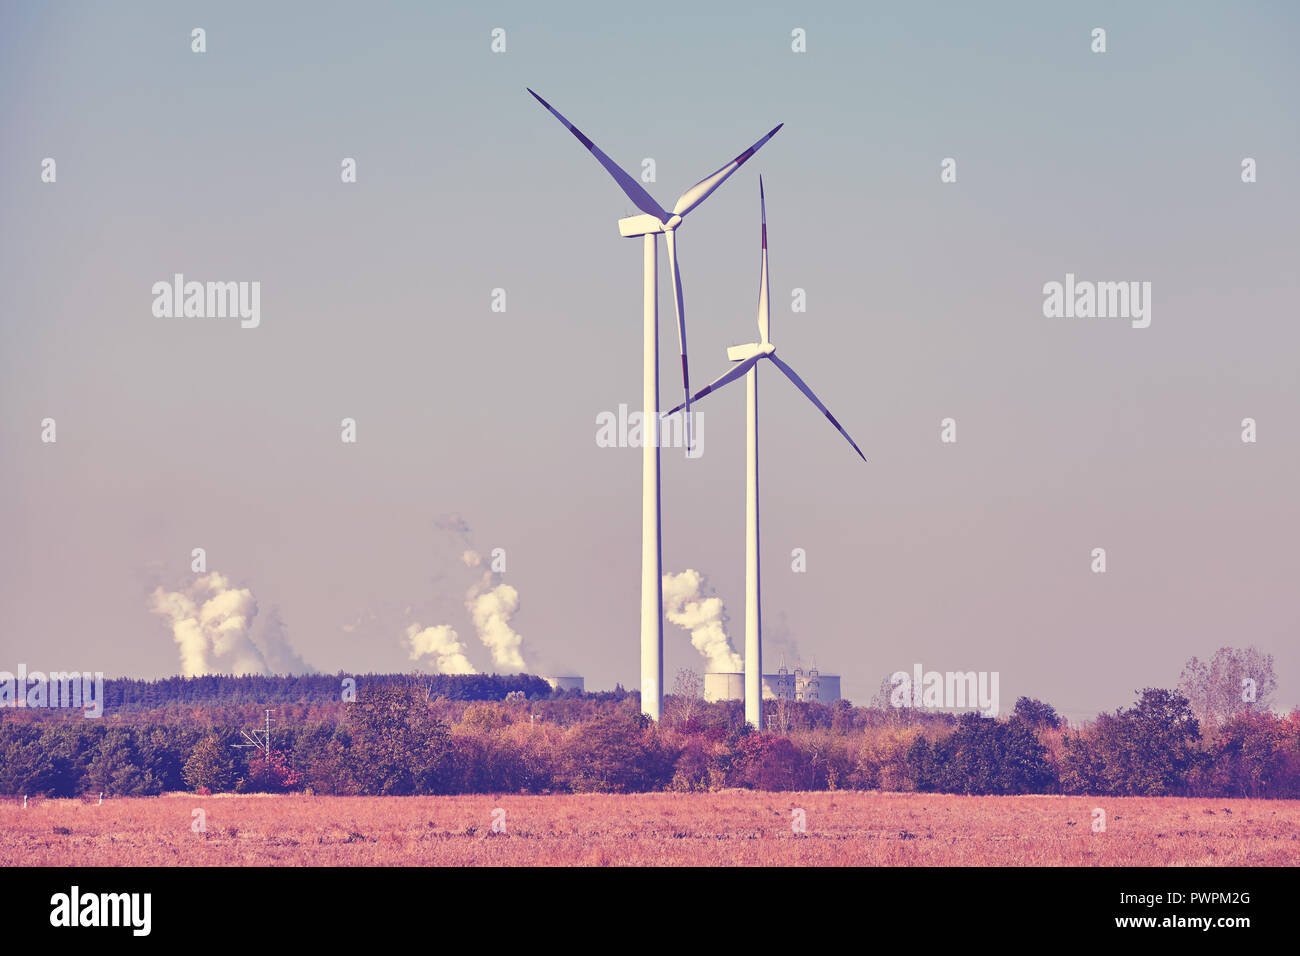 Windmills with smoking chimneys in background, color toned picture. Stock Photo